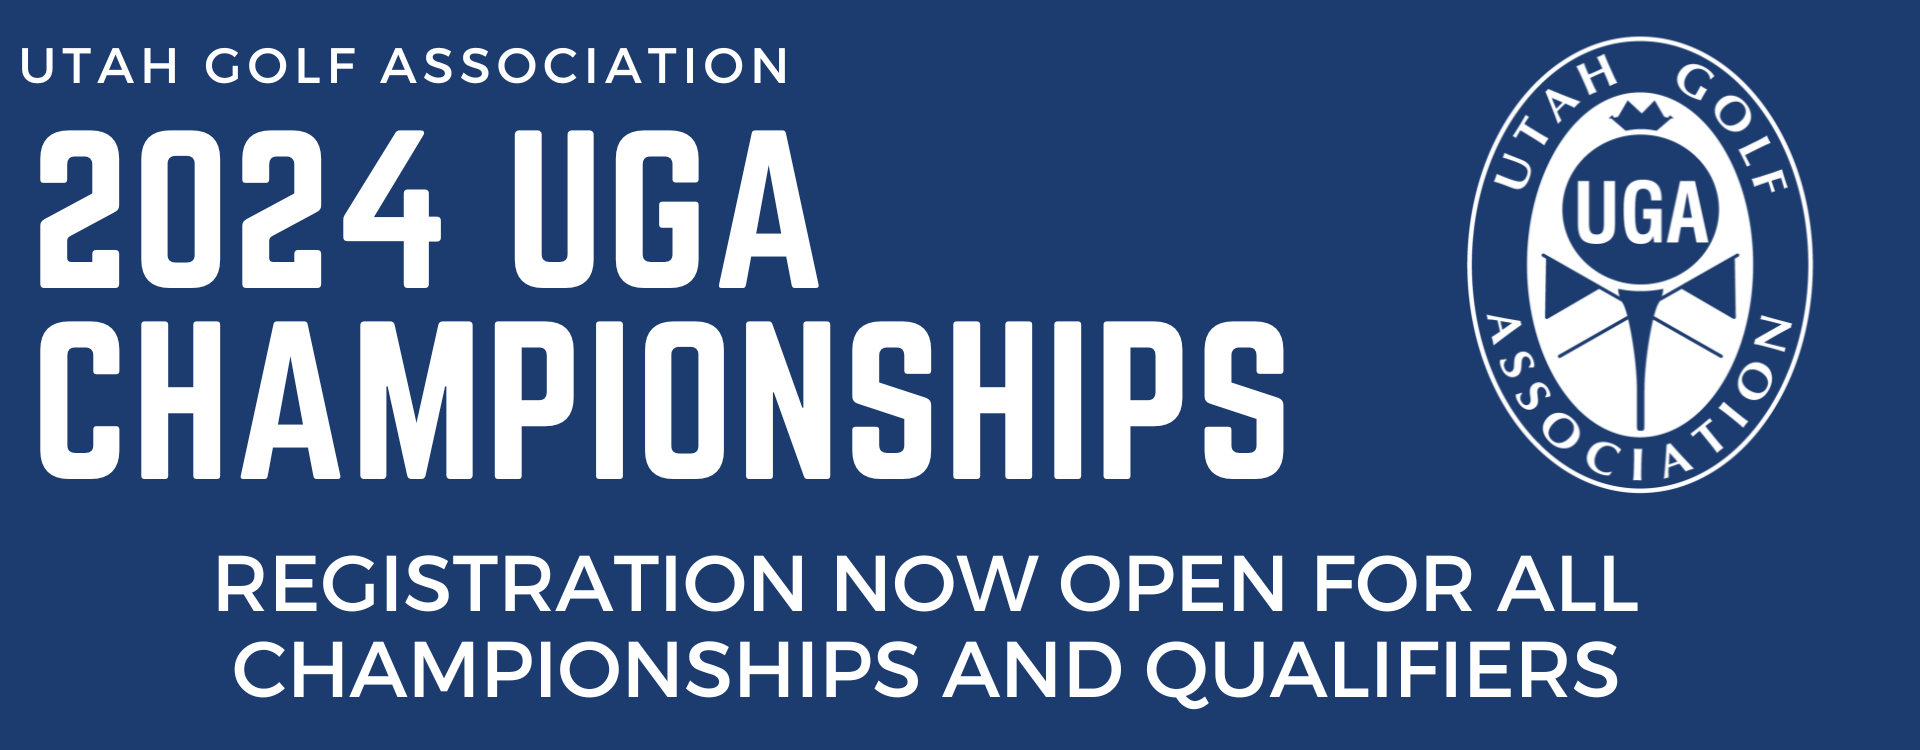 UGA TOURNAMENT REGISTRATION NOW OPEN CLICK HERE TO REGISTER (10)